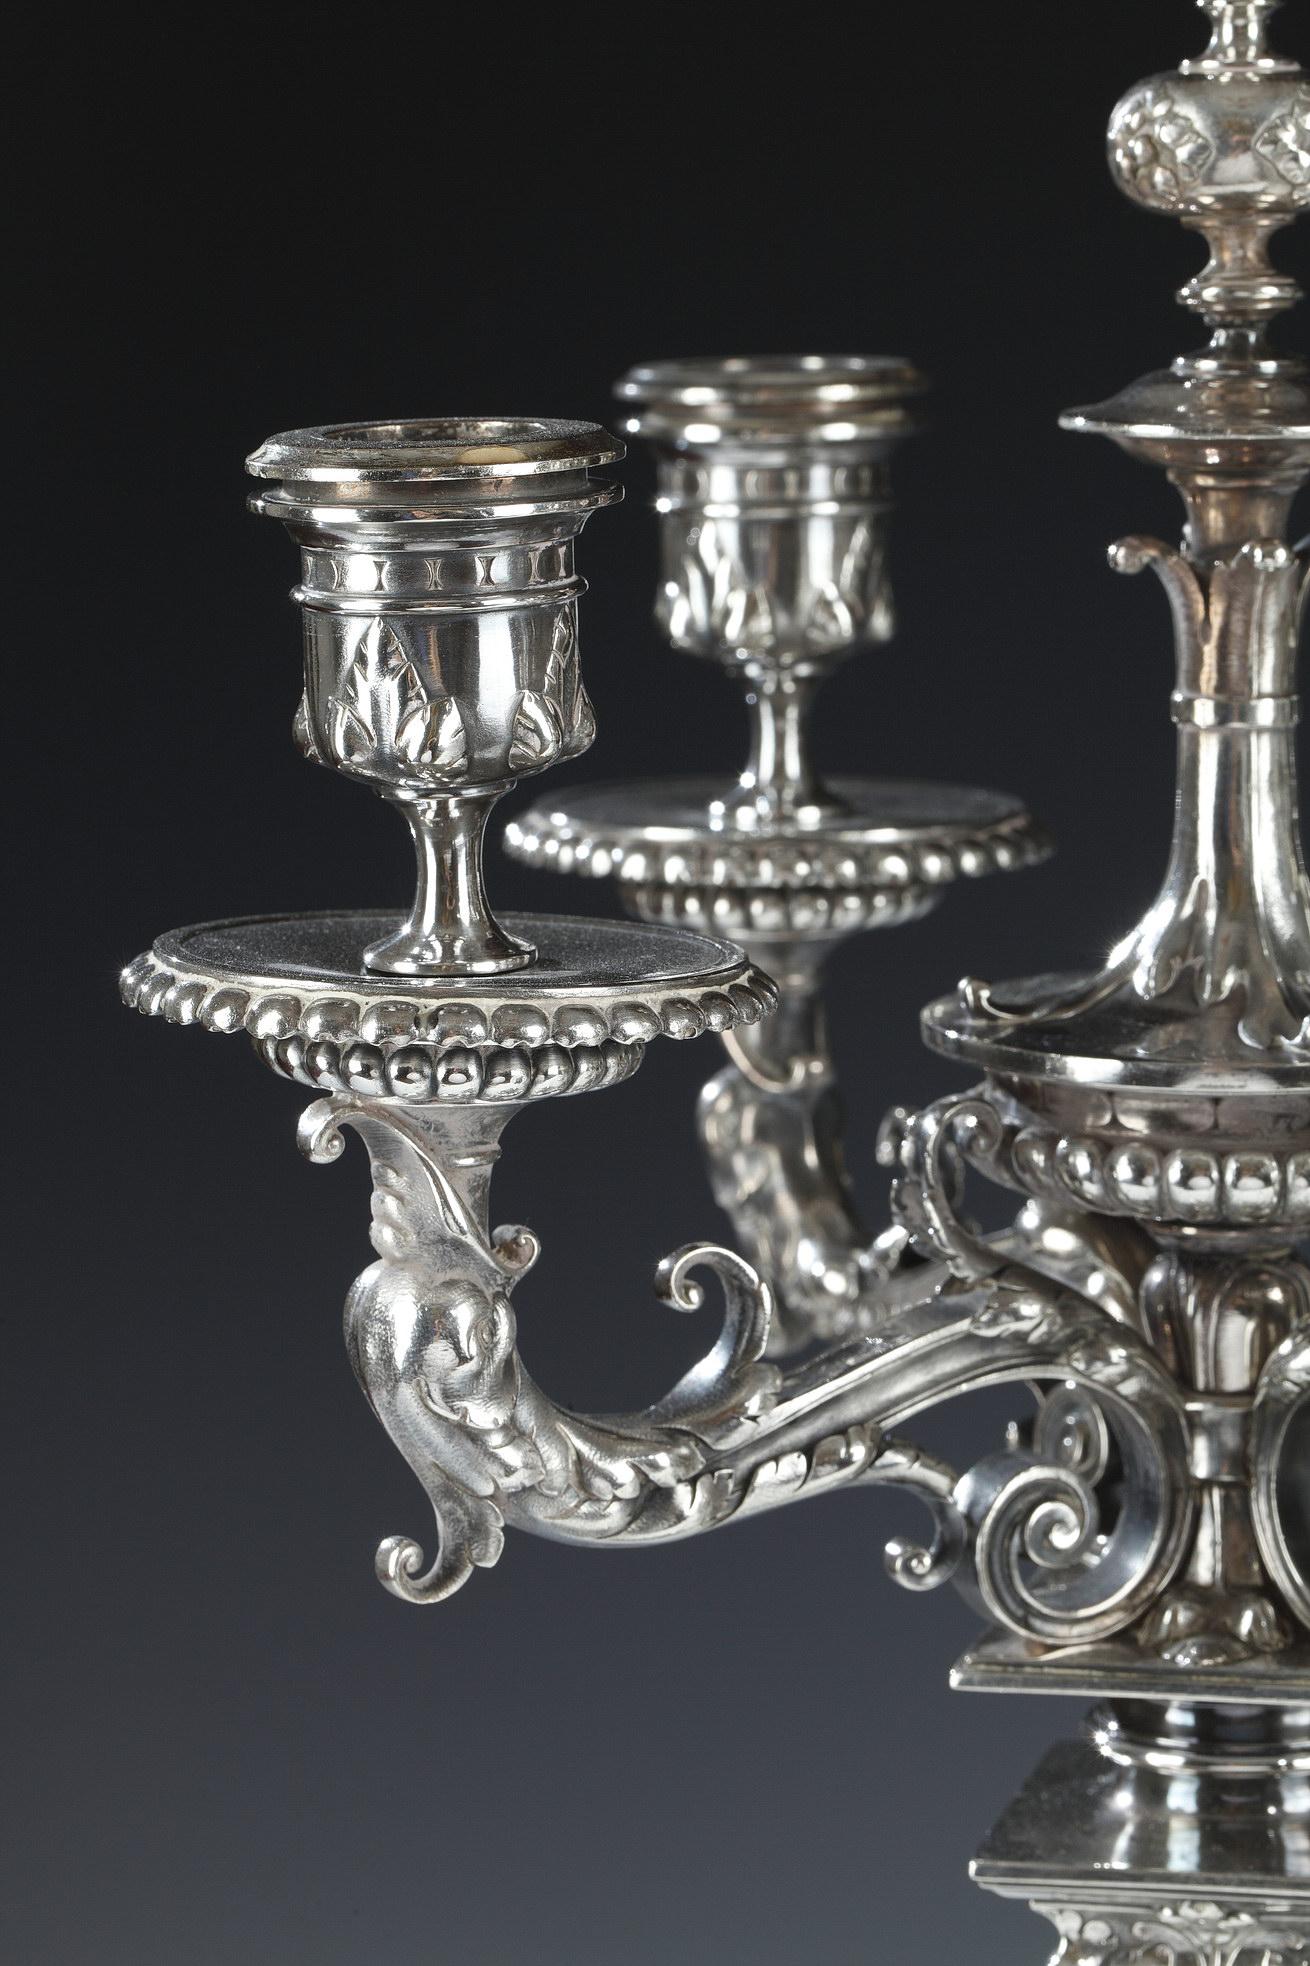 Bronze Pair of Candelabras by F. Barbedienne, L-C. Sevin and D. Attarge, France, 1869